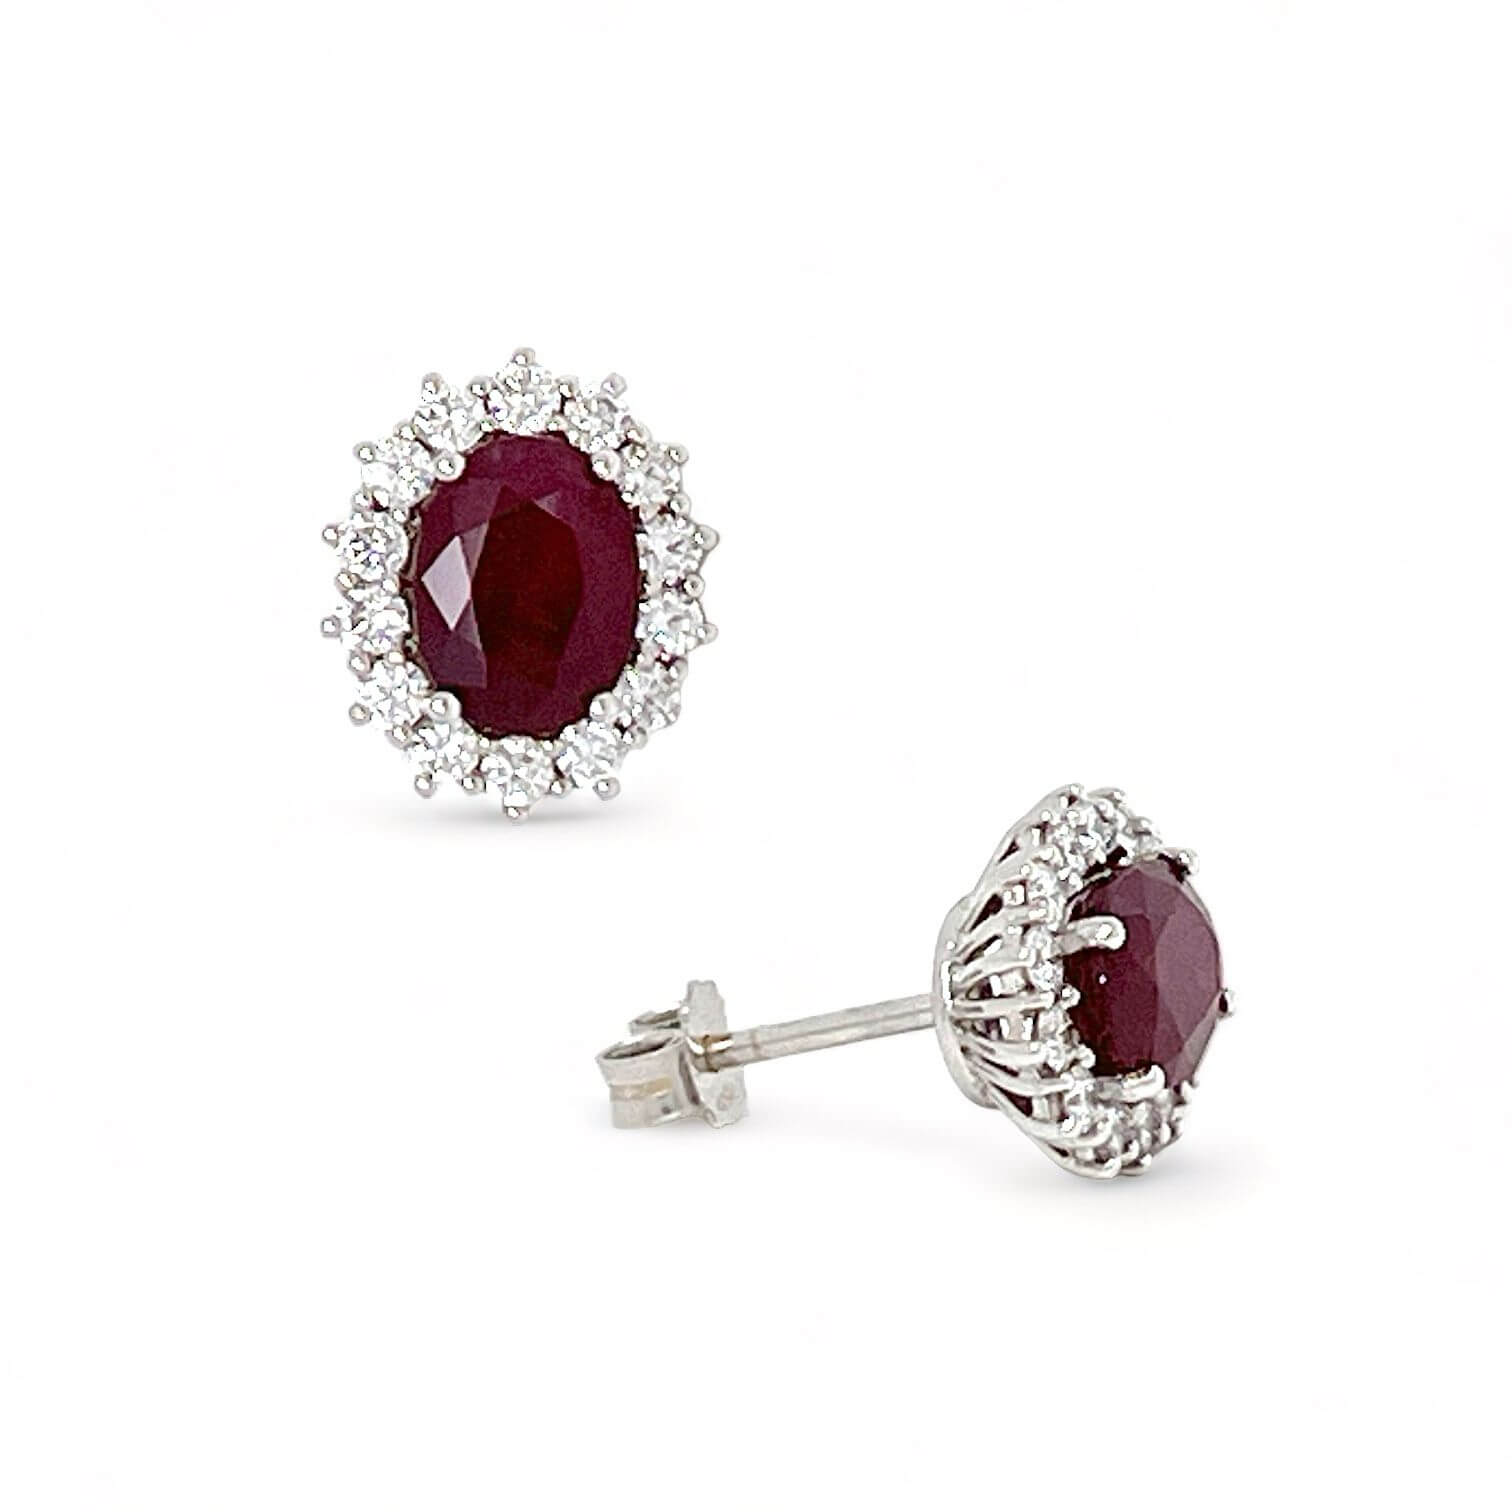 Ruby earrings white gold and diamonds Art. OR495